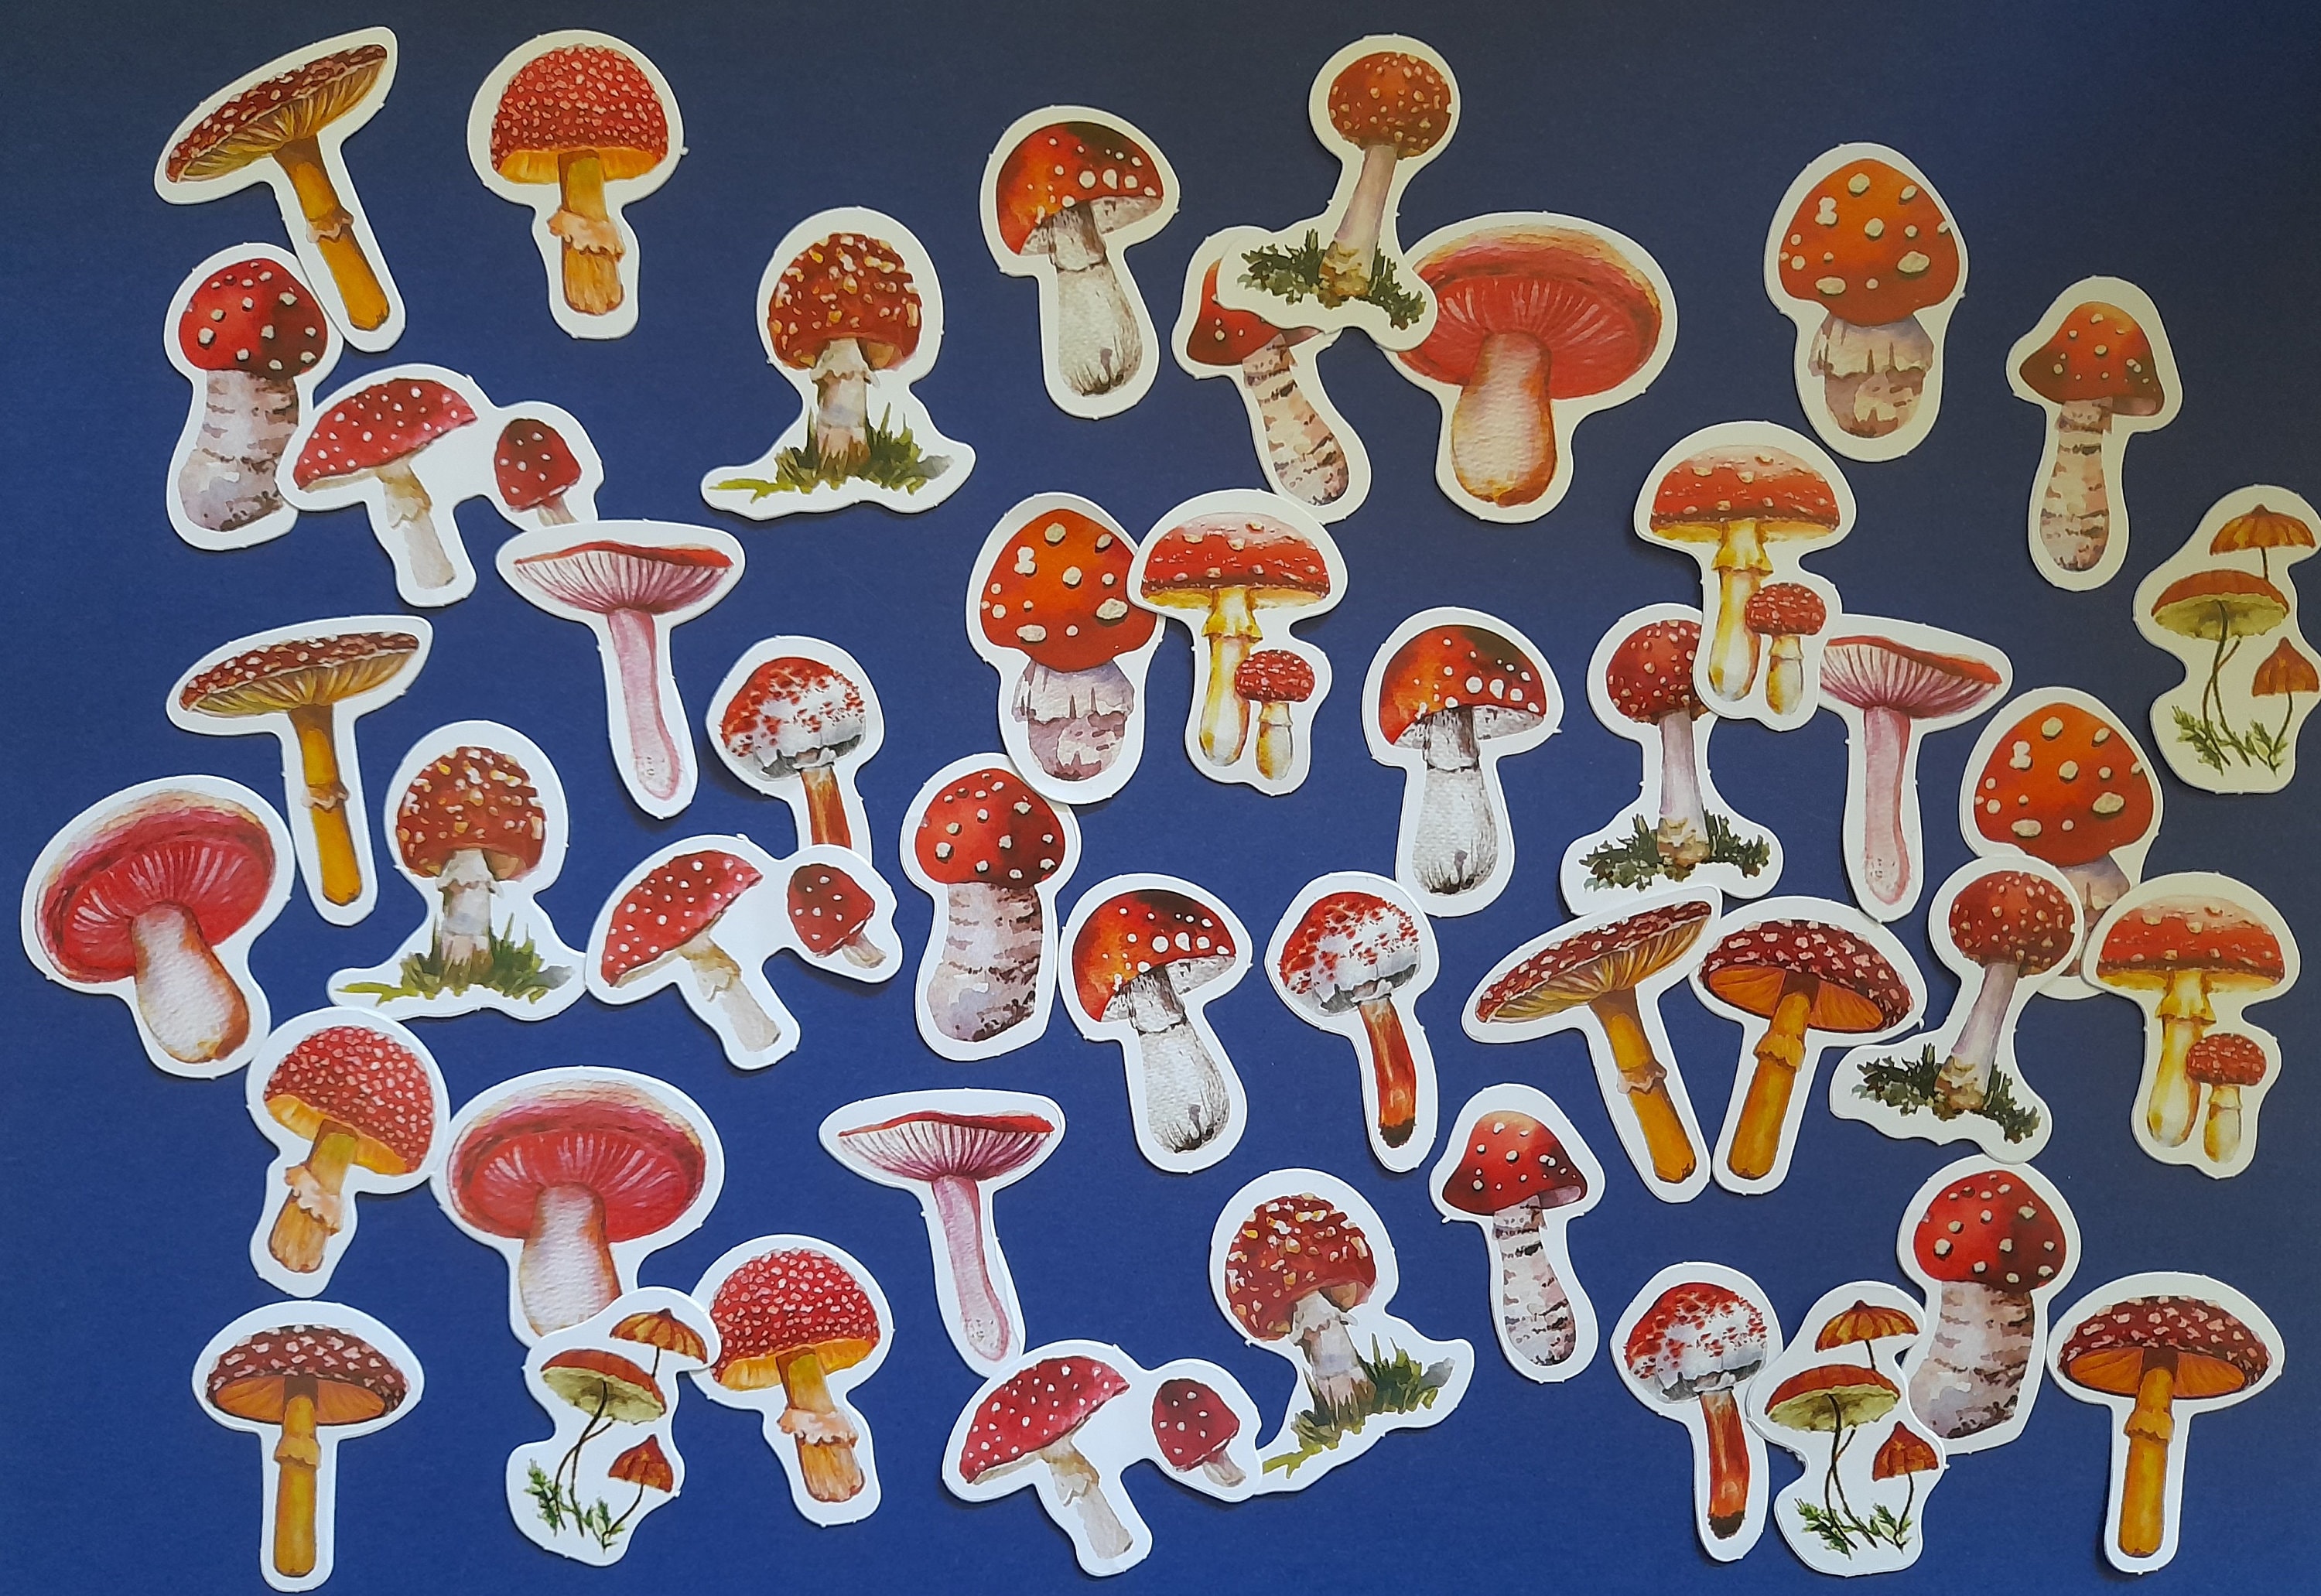 Decorative Stickers Cute Mushrooms Set of 46 Stickers Vintage Style 